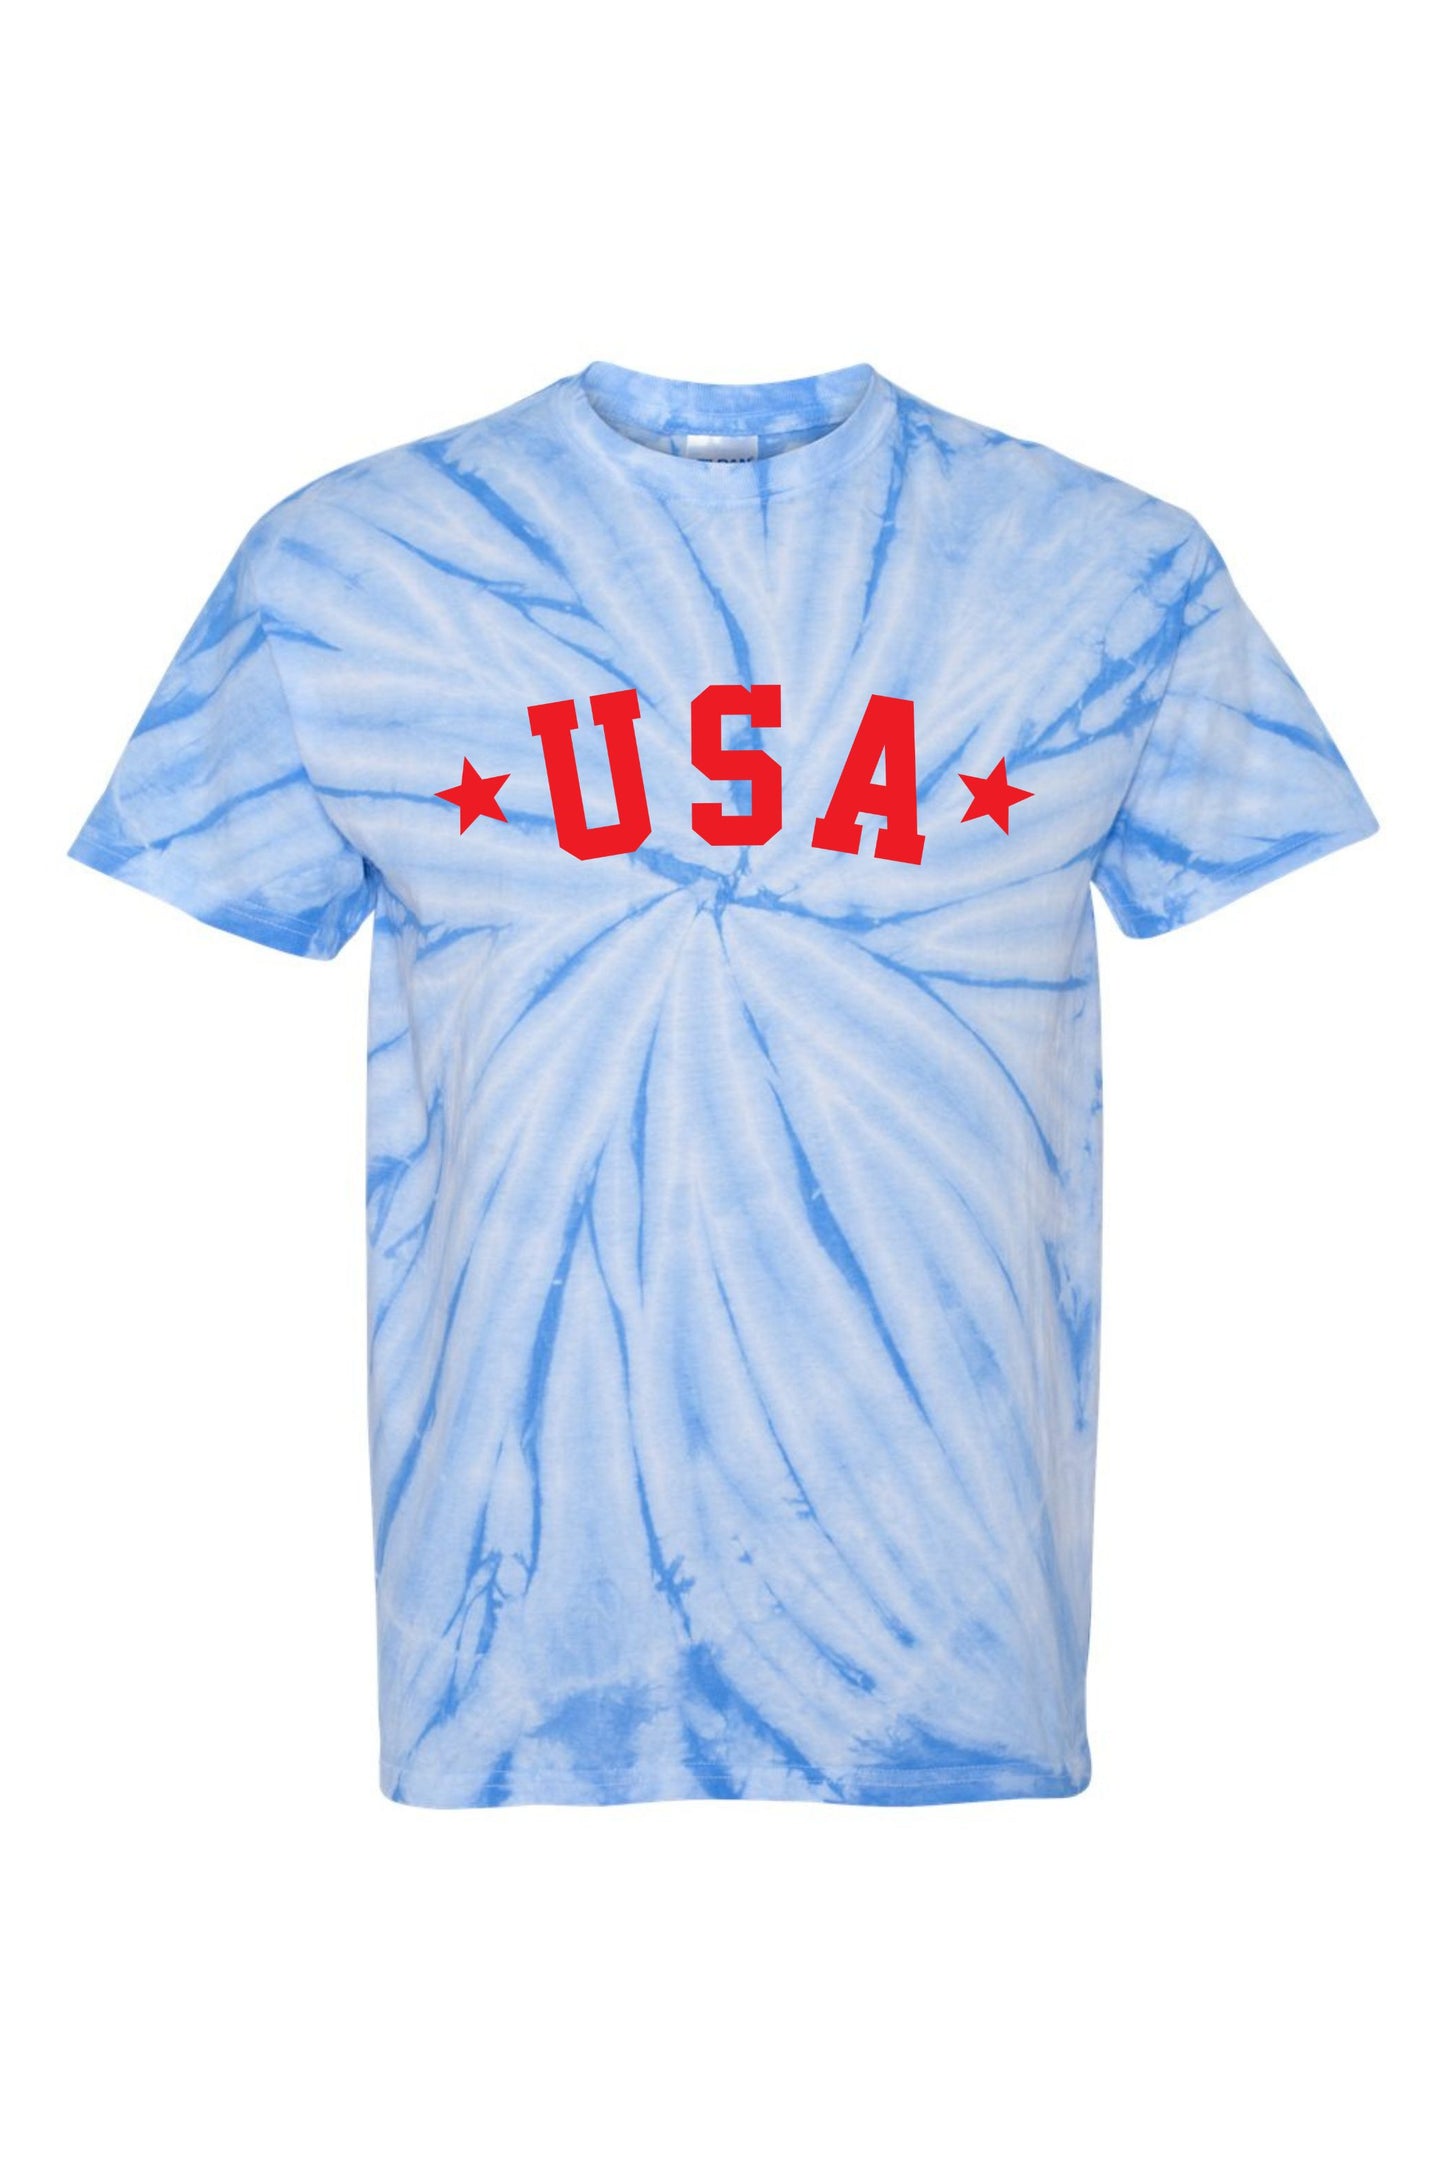 USA Foil | Kids Tie Dye Tee | RTS-Kids Tees-Sister Shirts-Sister Shirts, Cute & Custom Tees for Mama & Littles in Trussville, Alabama.